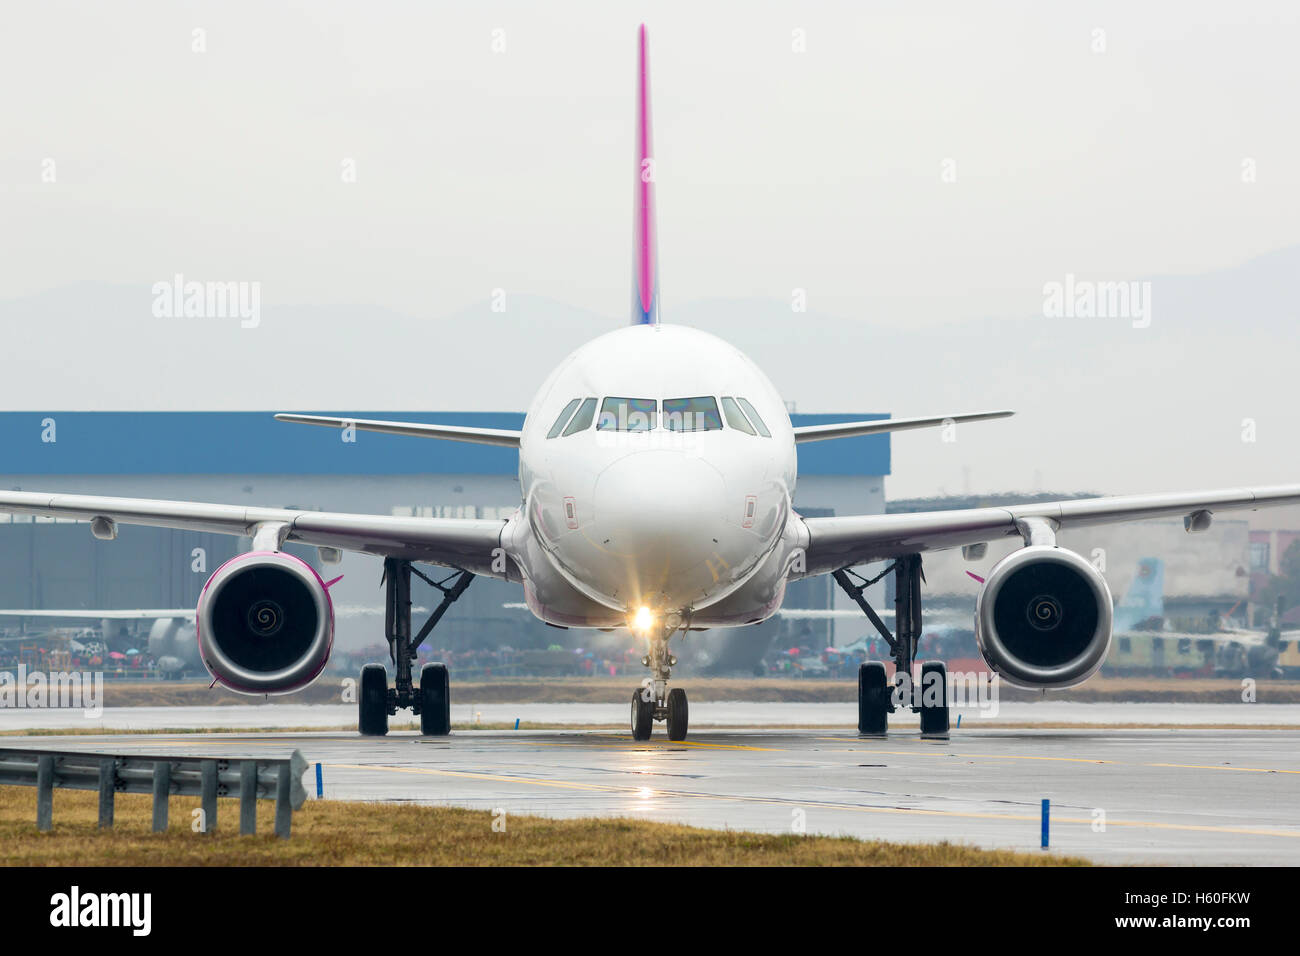 Airplane on the runway after landing at the airport. Stock Photo